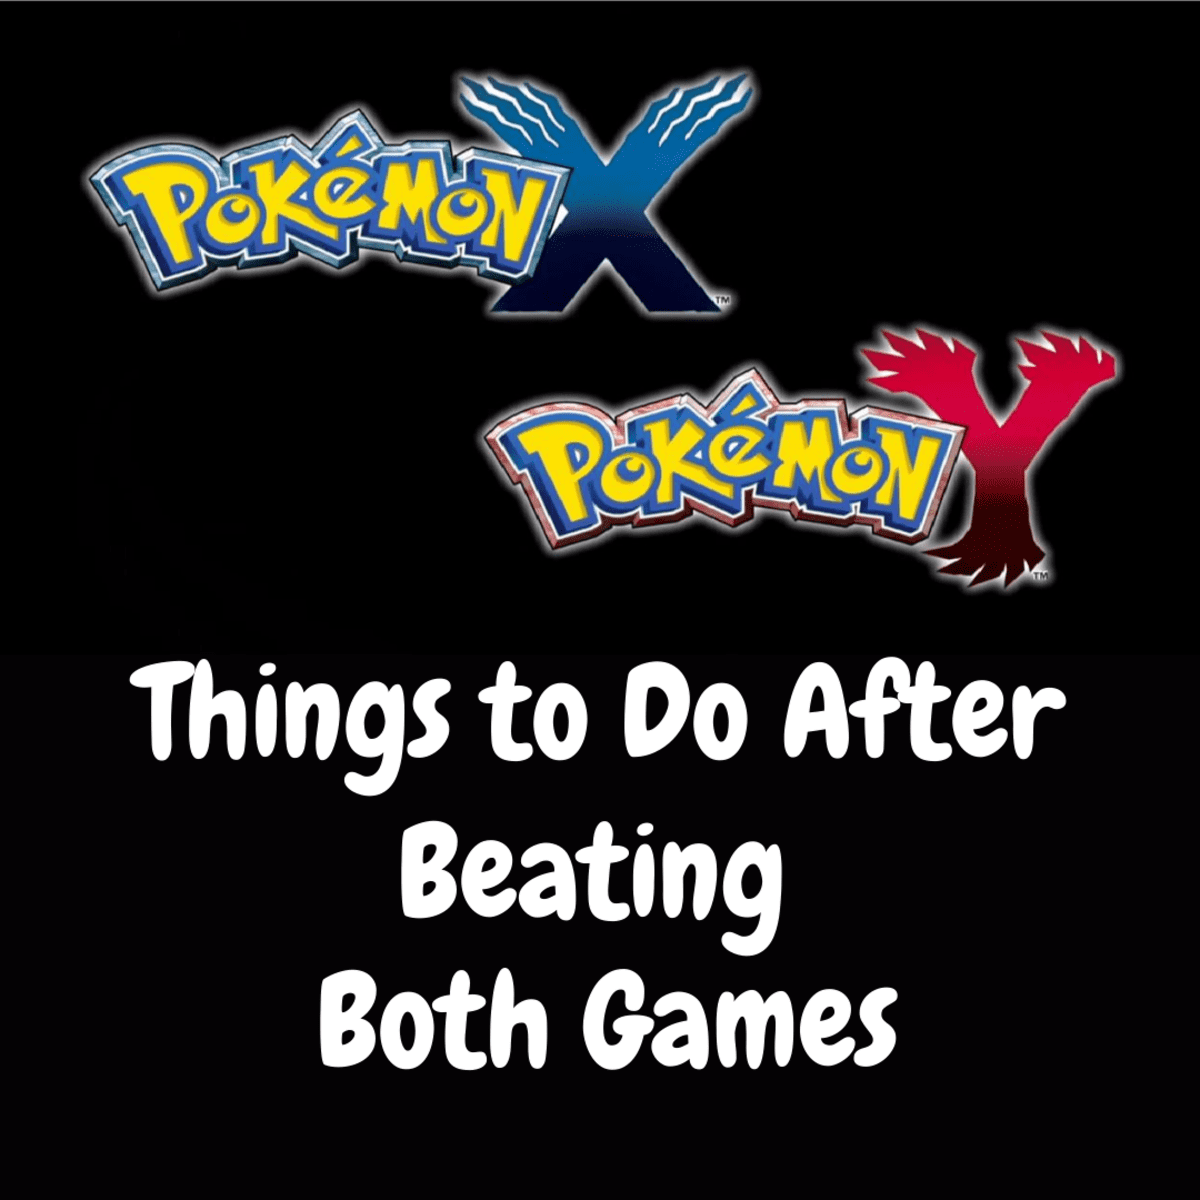 Pokemon X And Y Postgame Walkthrough What To Do After Beating The Game Levelskip